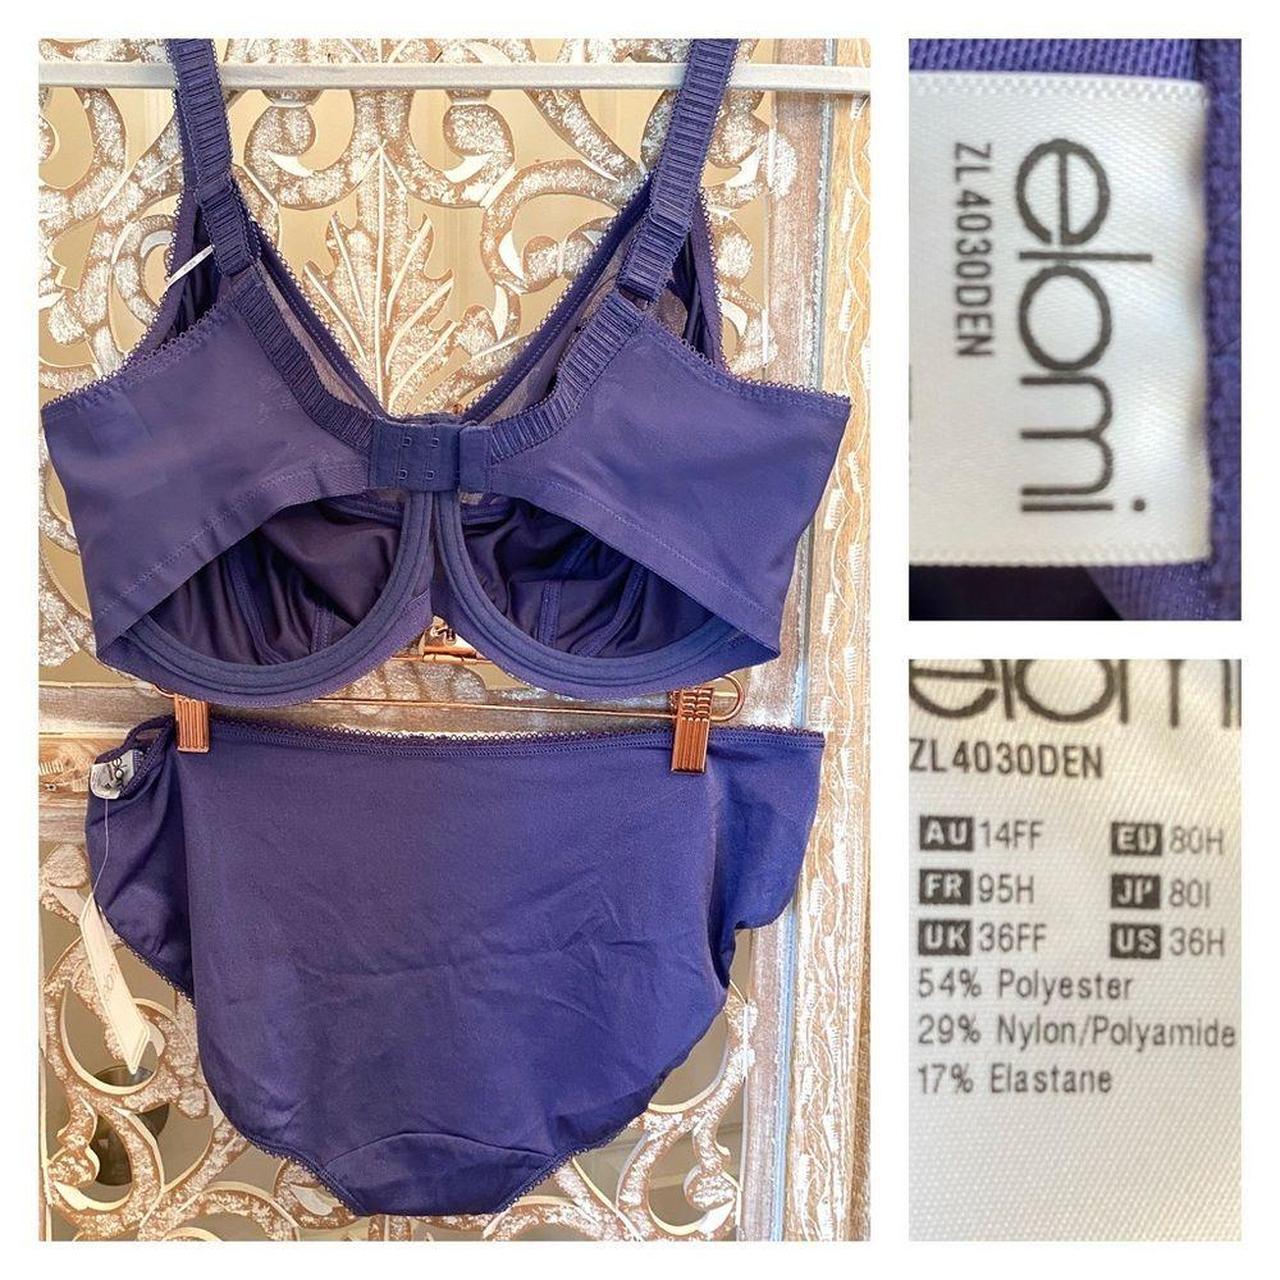 Product Image 3 - NWT Elomi set purple embroidery